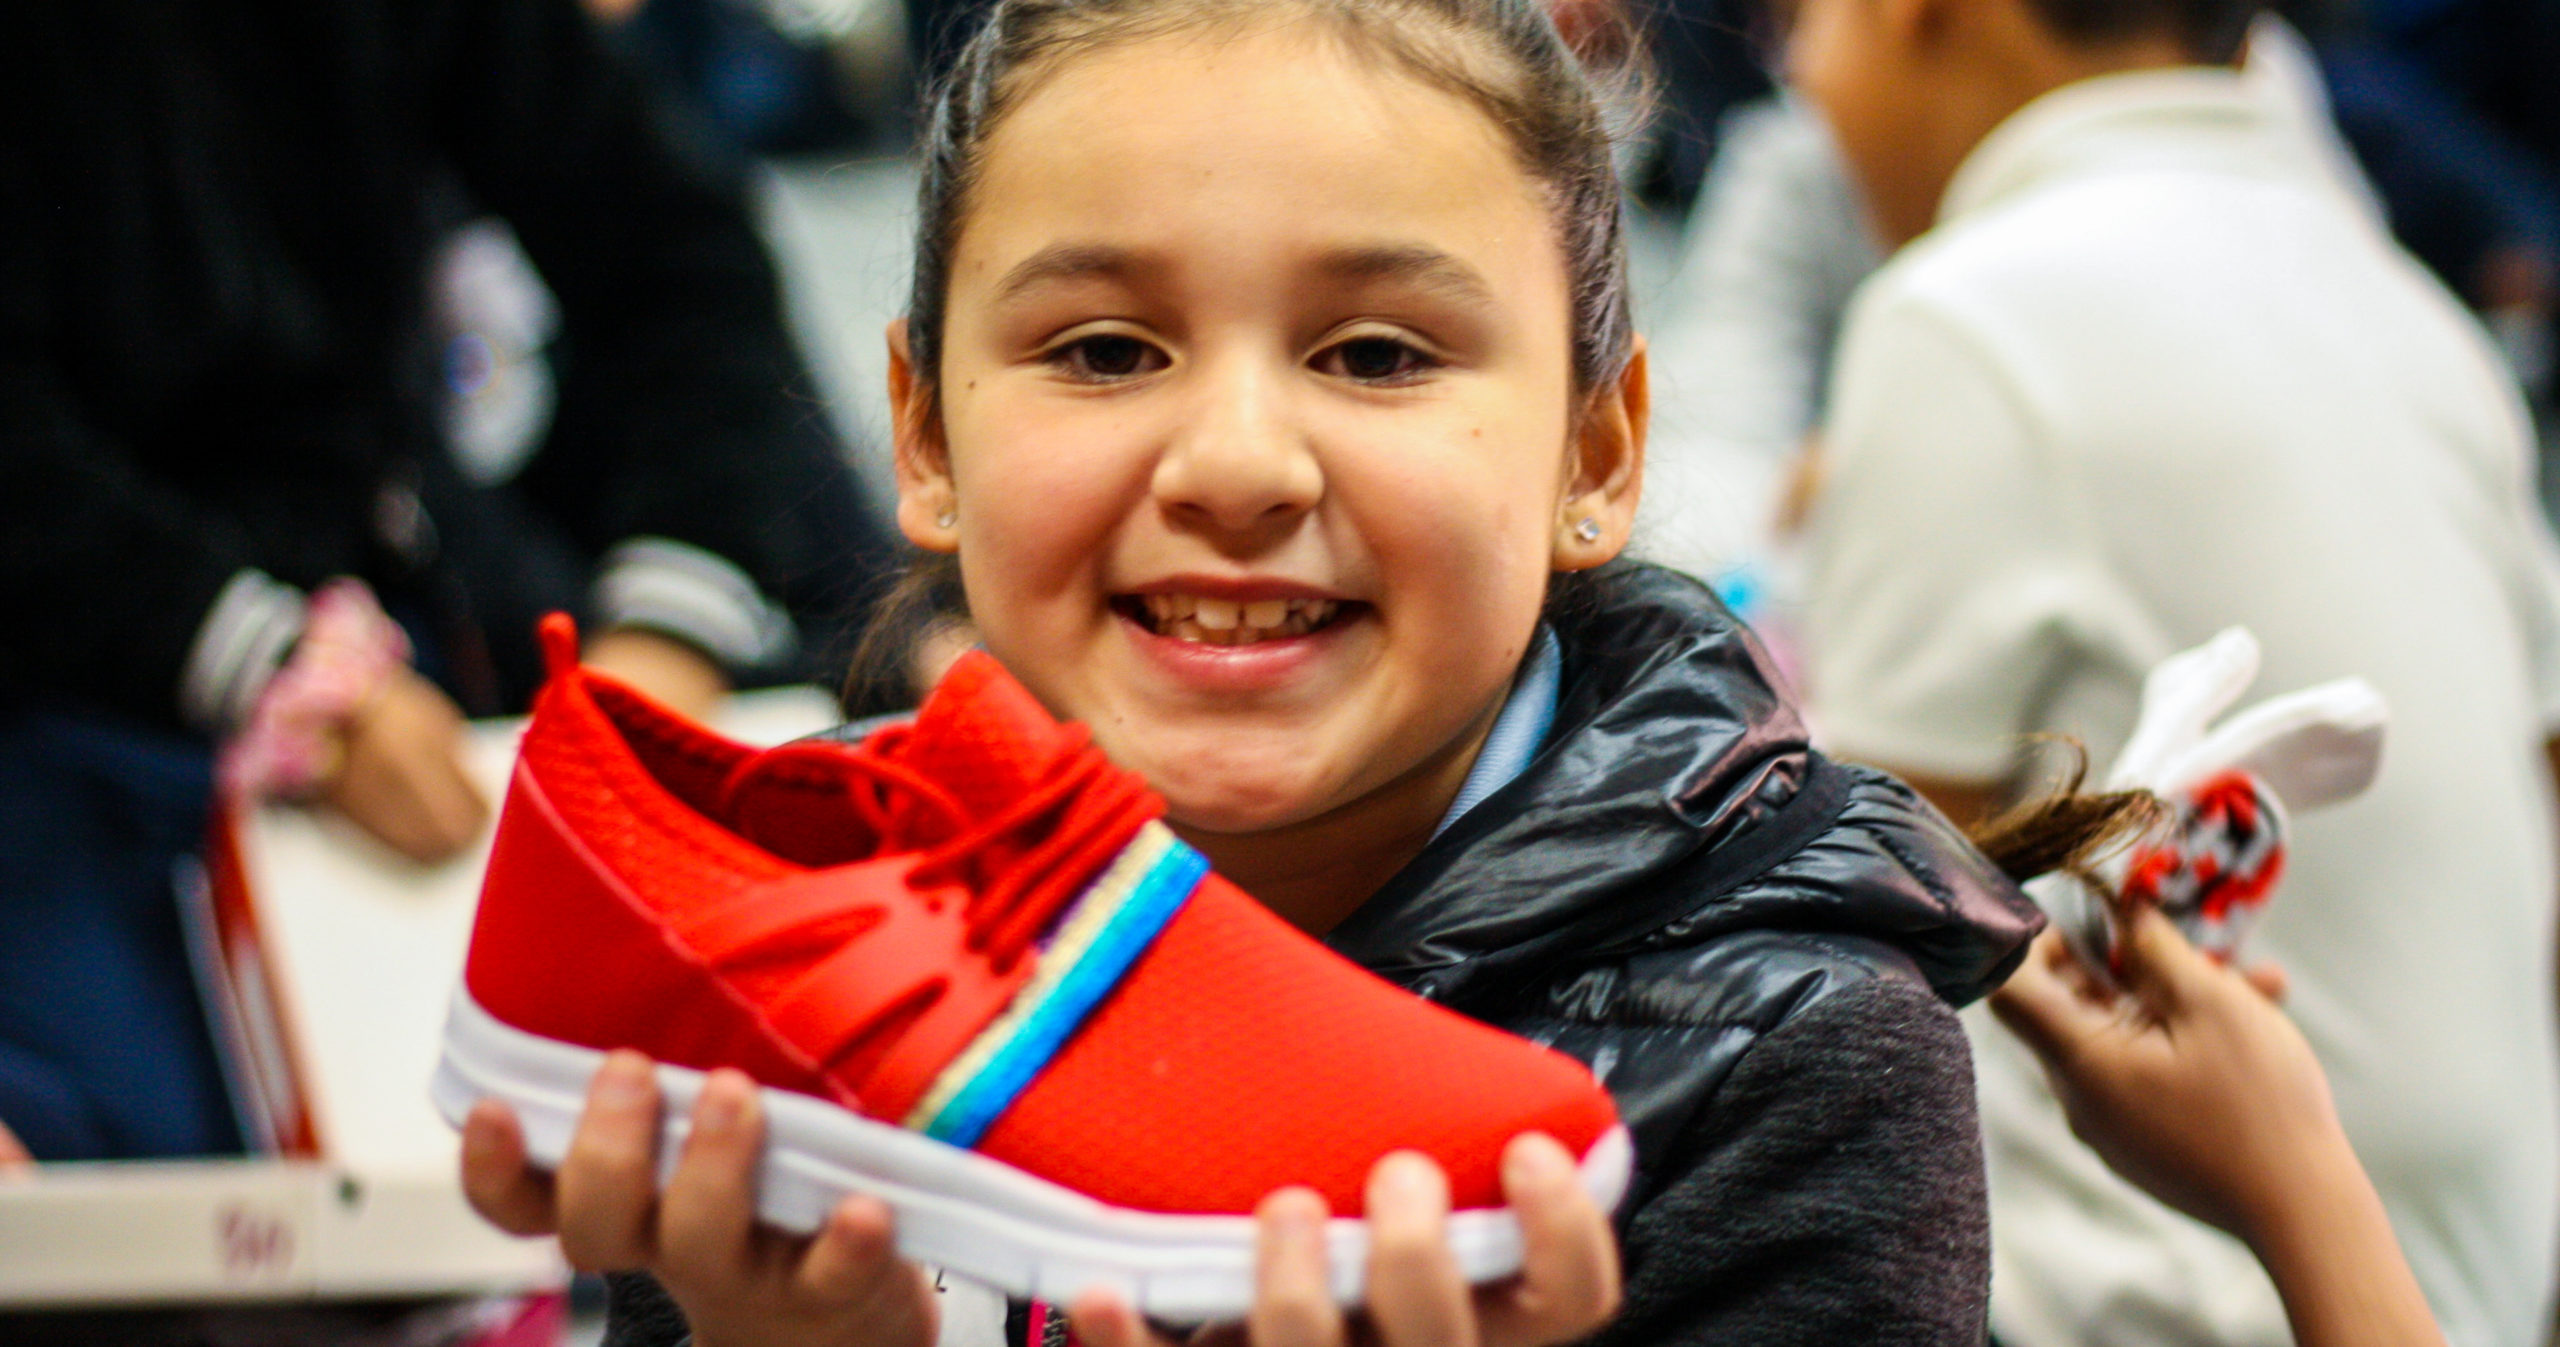 New shoes bring smiles to kids in El Monte